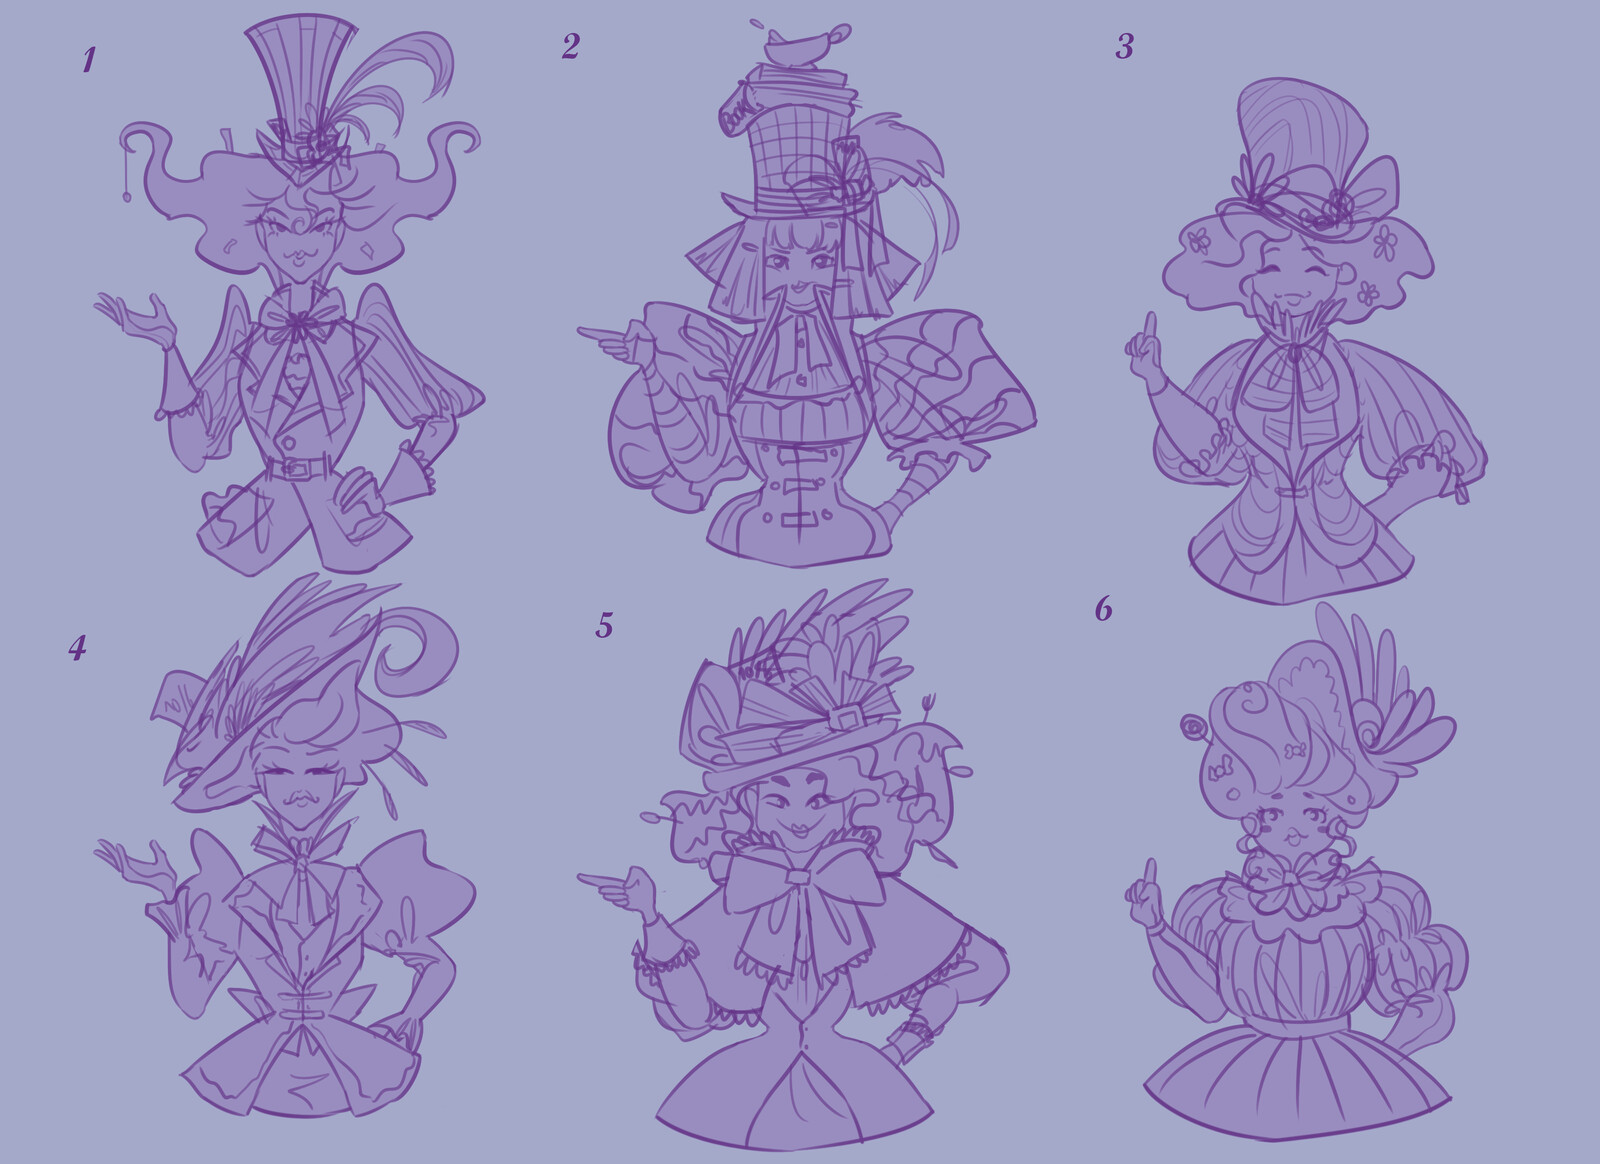 Sketches for the Mad Hatter.